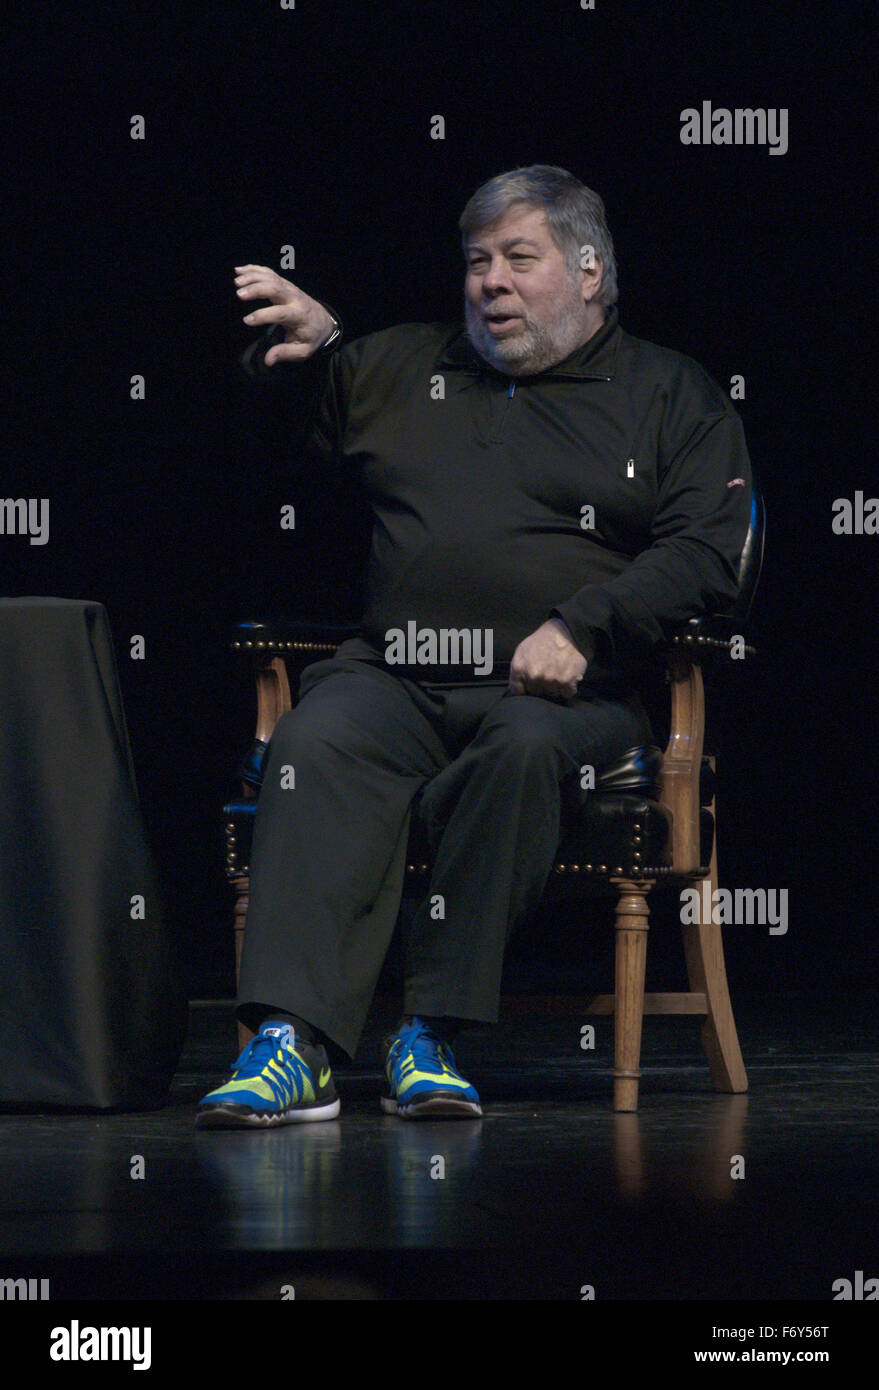 Lawrence, Kansas. 11-20-2015 Steve Wozniak the co-founder of Apple computers gives lecture on innovation and entrepreneurship as part of the Anderson Chandler Lecture series at the LIED center of Kansas University. Credit: Mark Reinstein Stock Photo